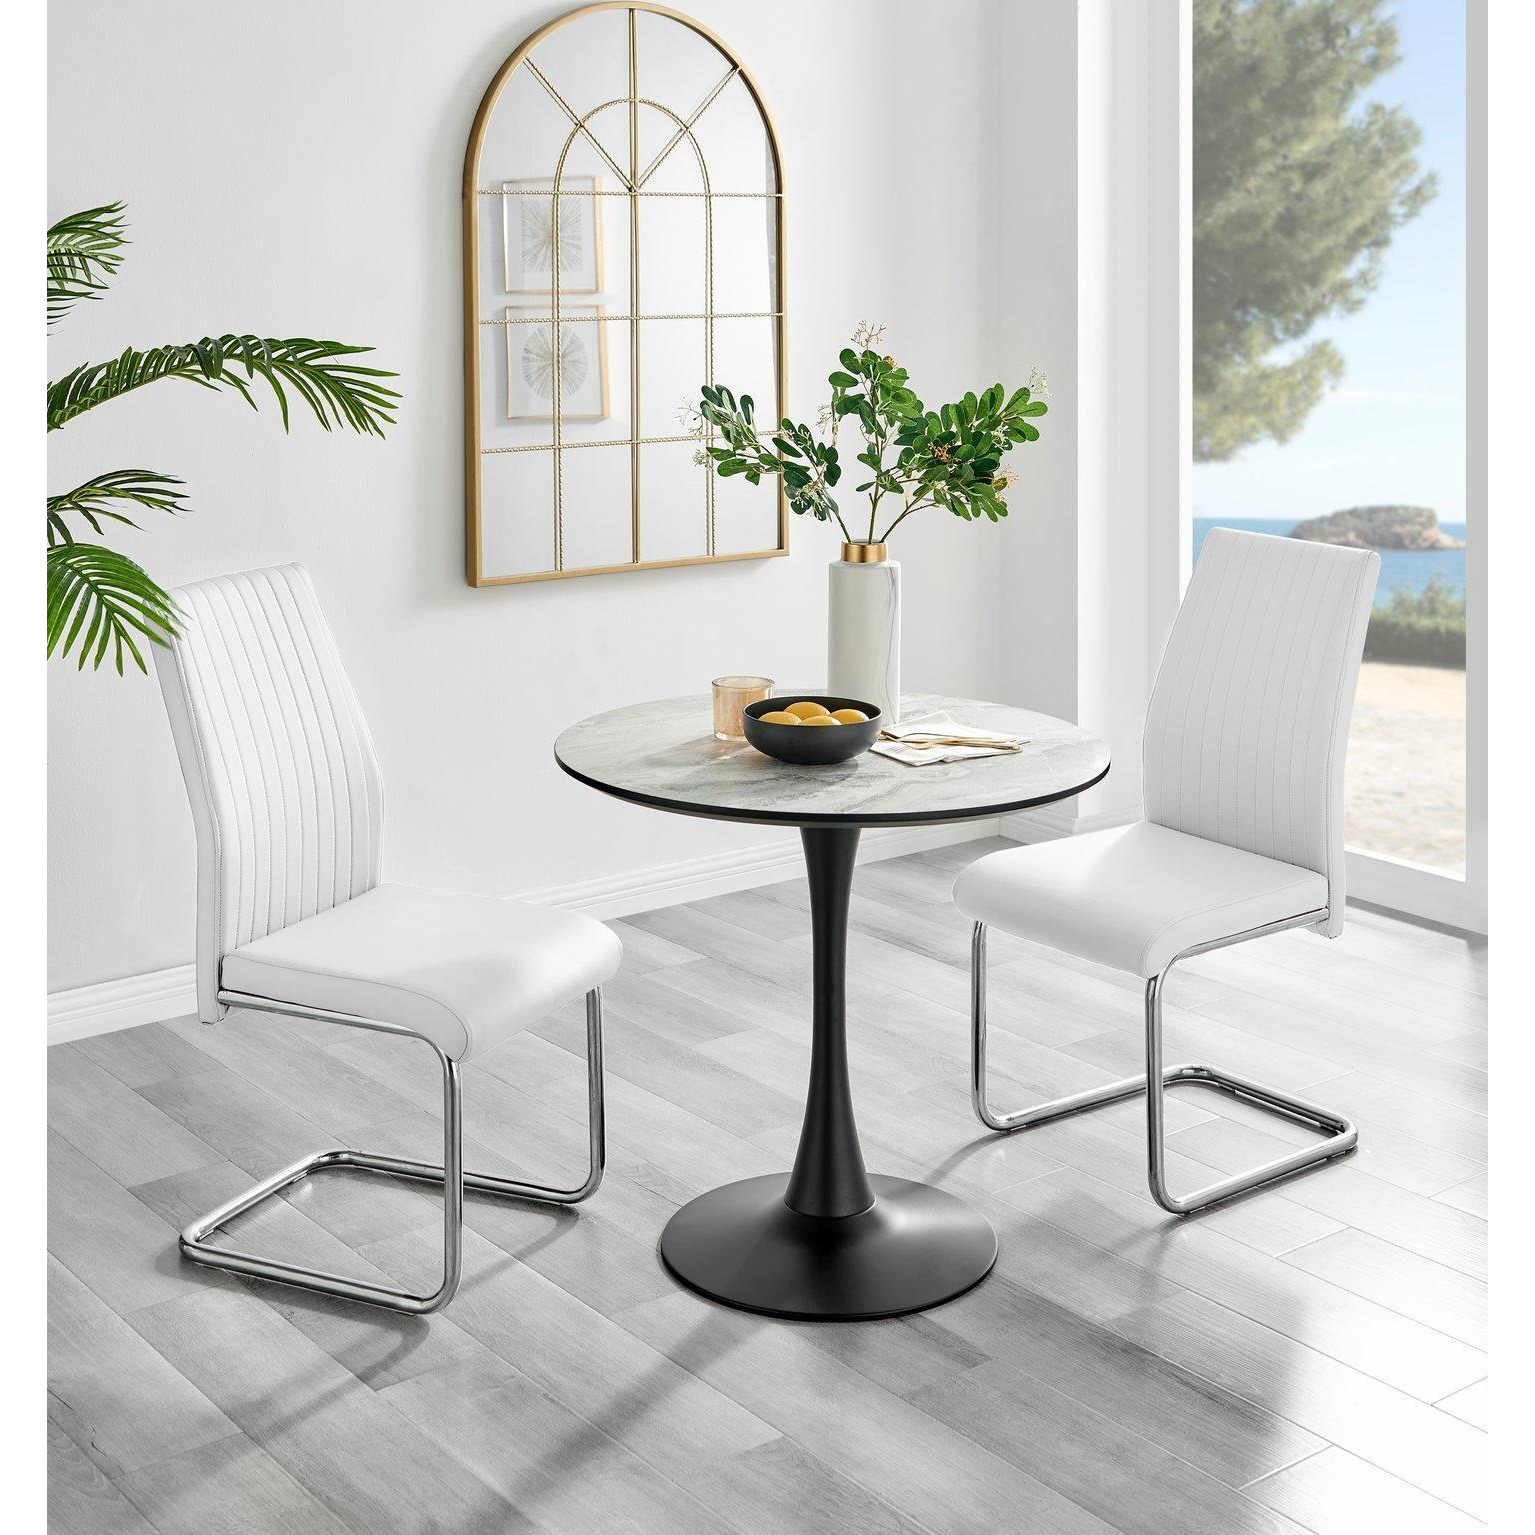 Elina White Marble Effect Scratch Resistant Dining Table & 2 Lorenzo Faux Leather Chairs - image 1